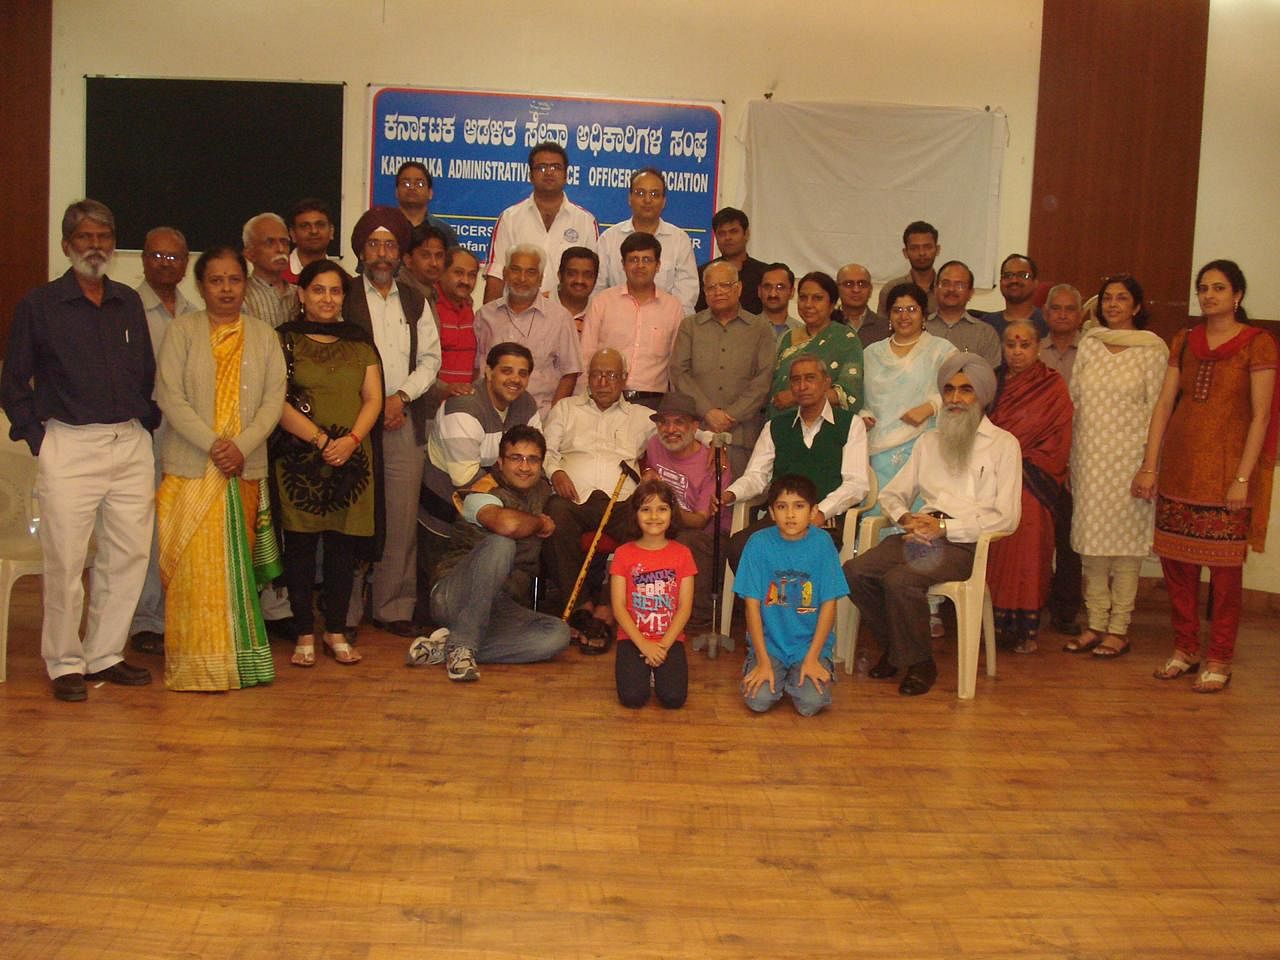 The RMIM Meet in December 2011. Lyricist Naqsh Lyallpuri (seated in centre, with stick) was the chief guest.